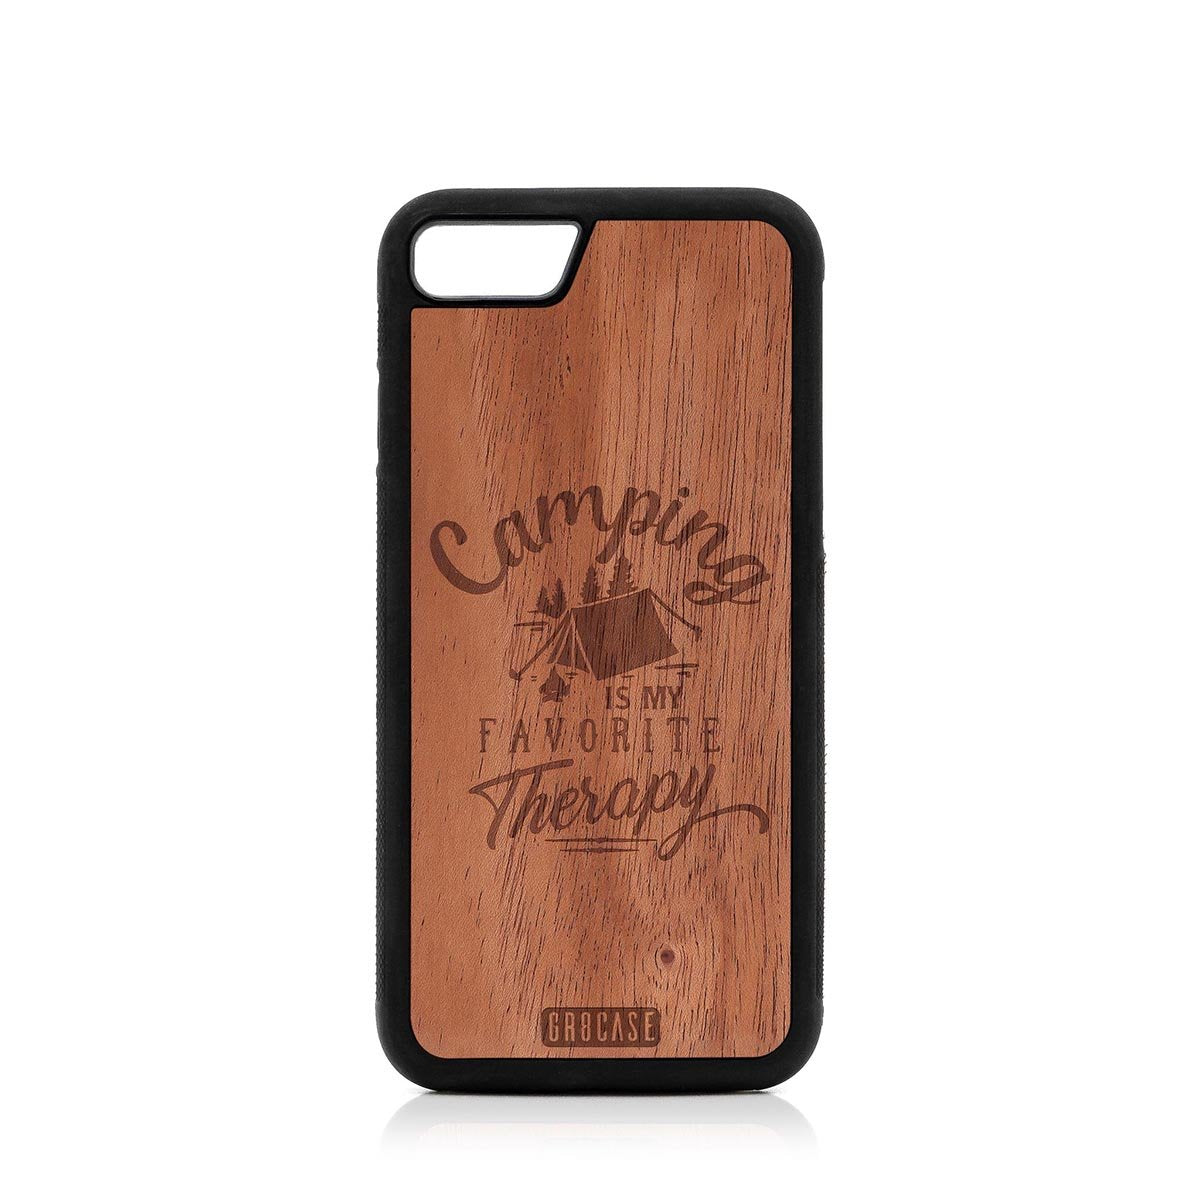 Camping Is My Favorite Therapy Design Wood Case For iPhone SE 2020 by GR8CASE